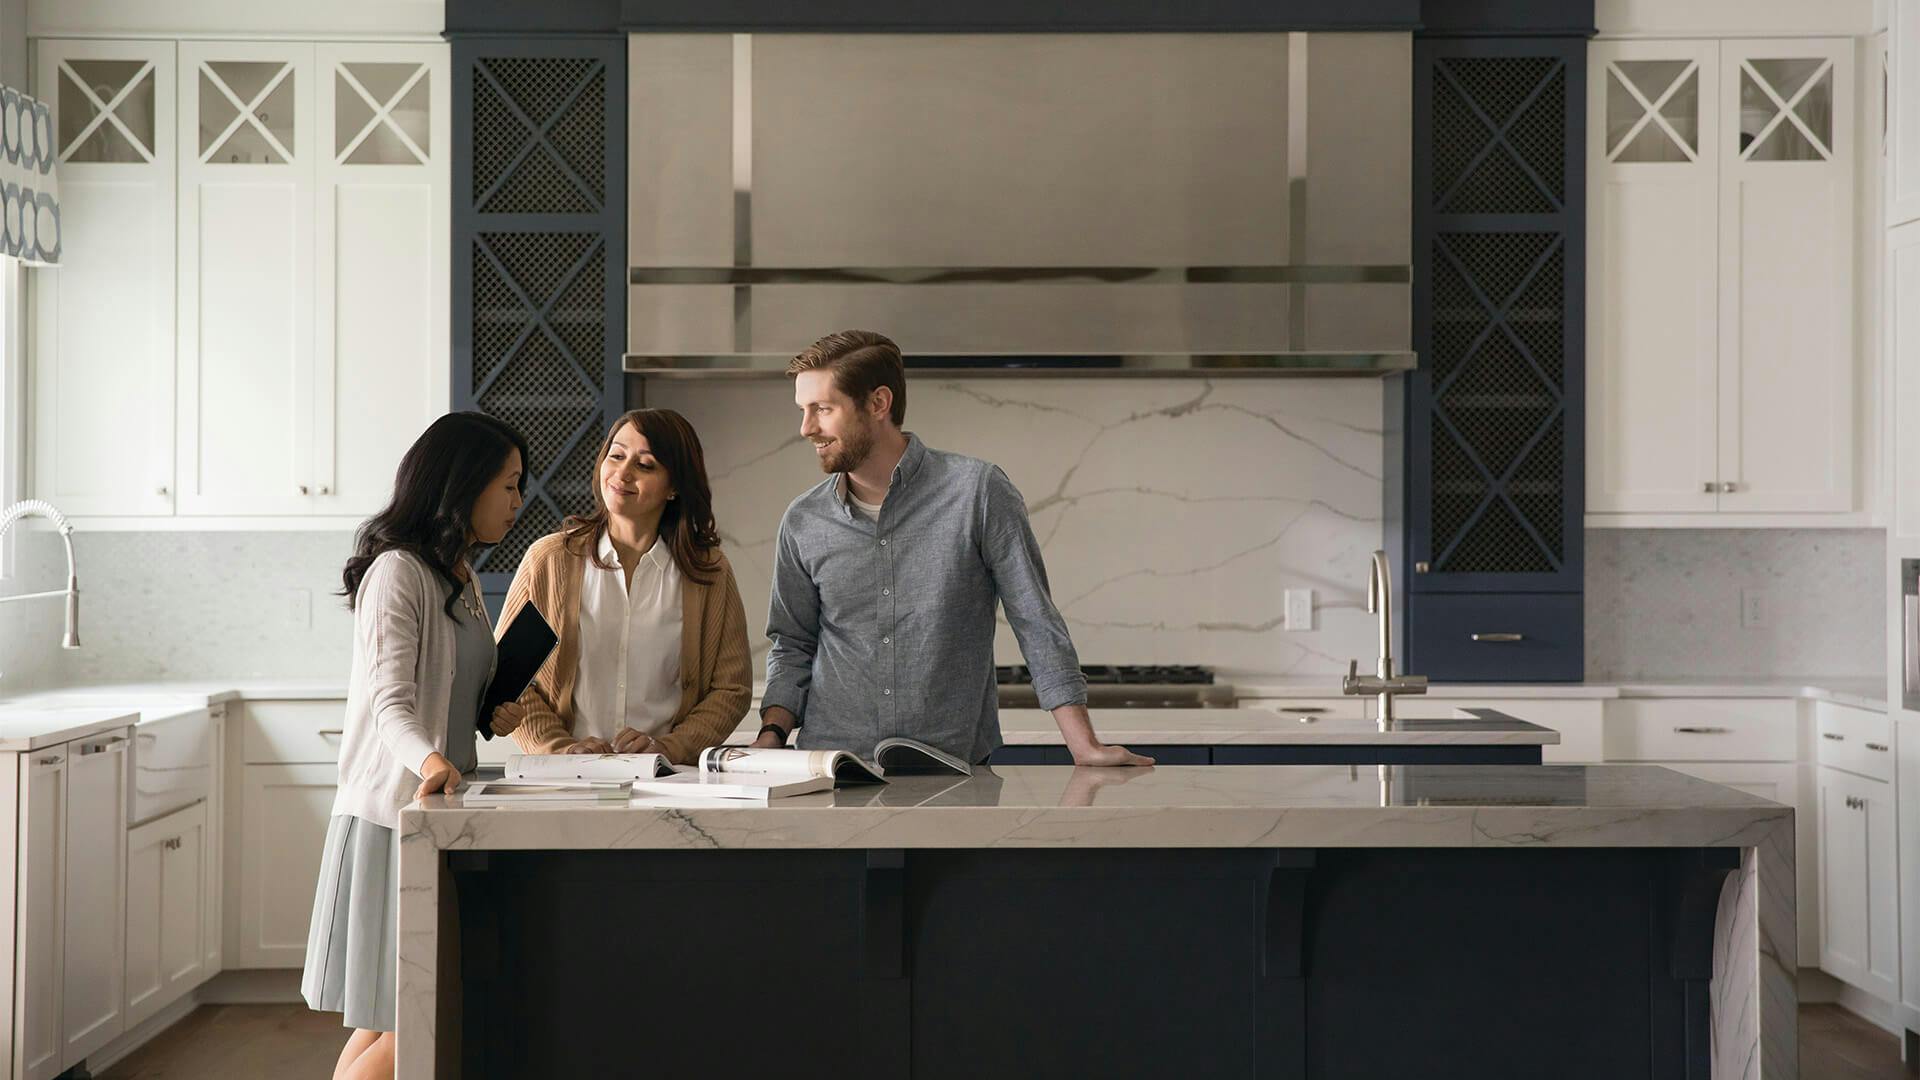 Kichler consultant assisting a smiling man and woman in their kitchen